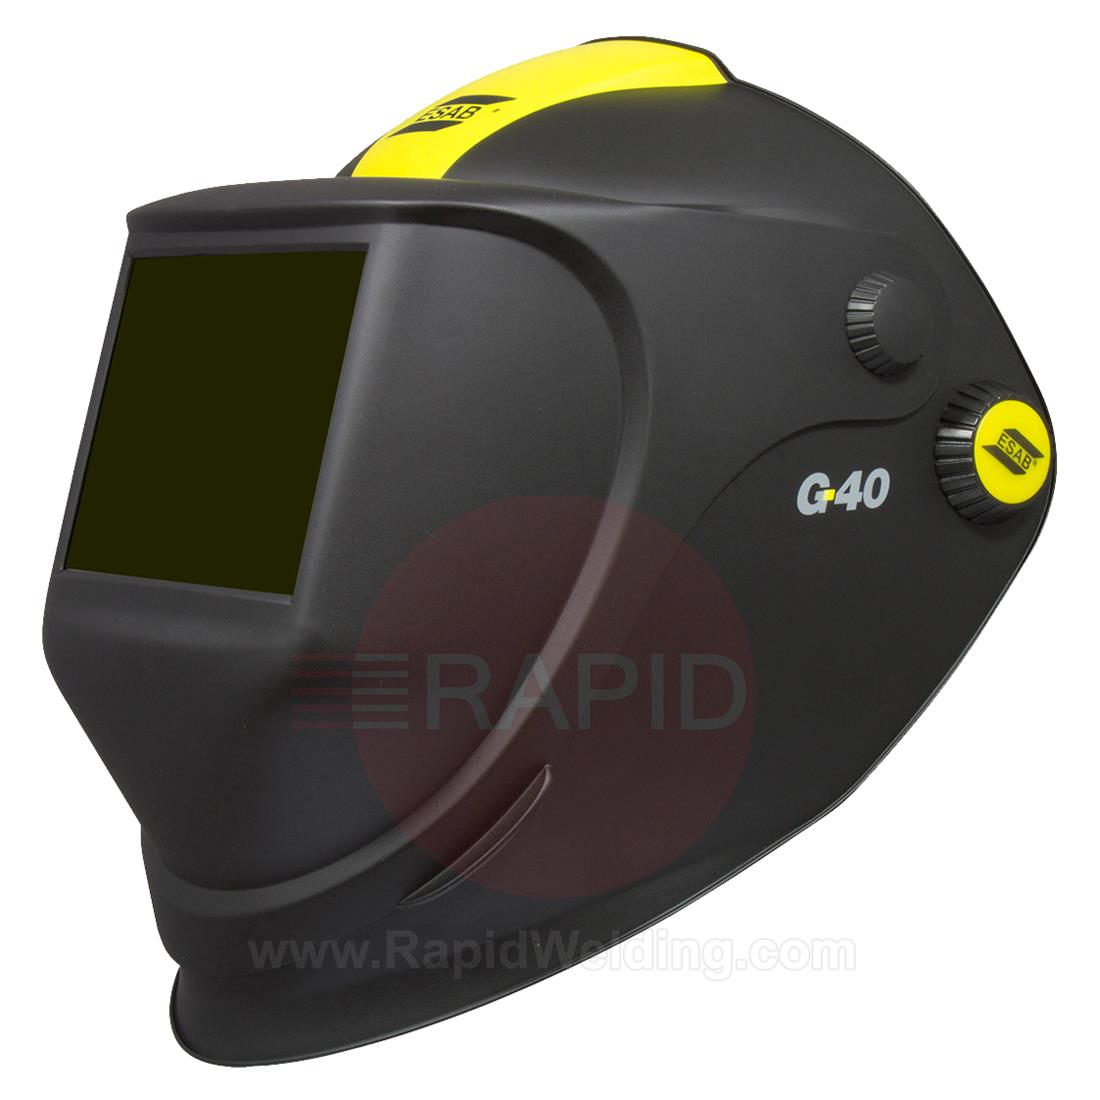 0700000440  ESAB G40 Air Flip-up Weld & Grind Helmet with 110 x 90mm Shade #10 Passive Lens